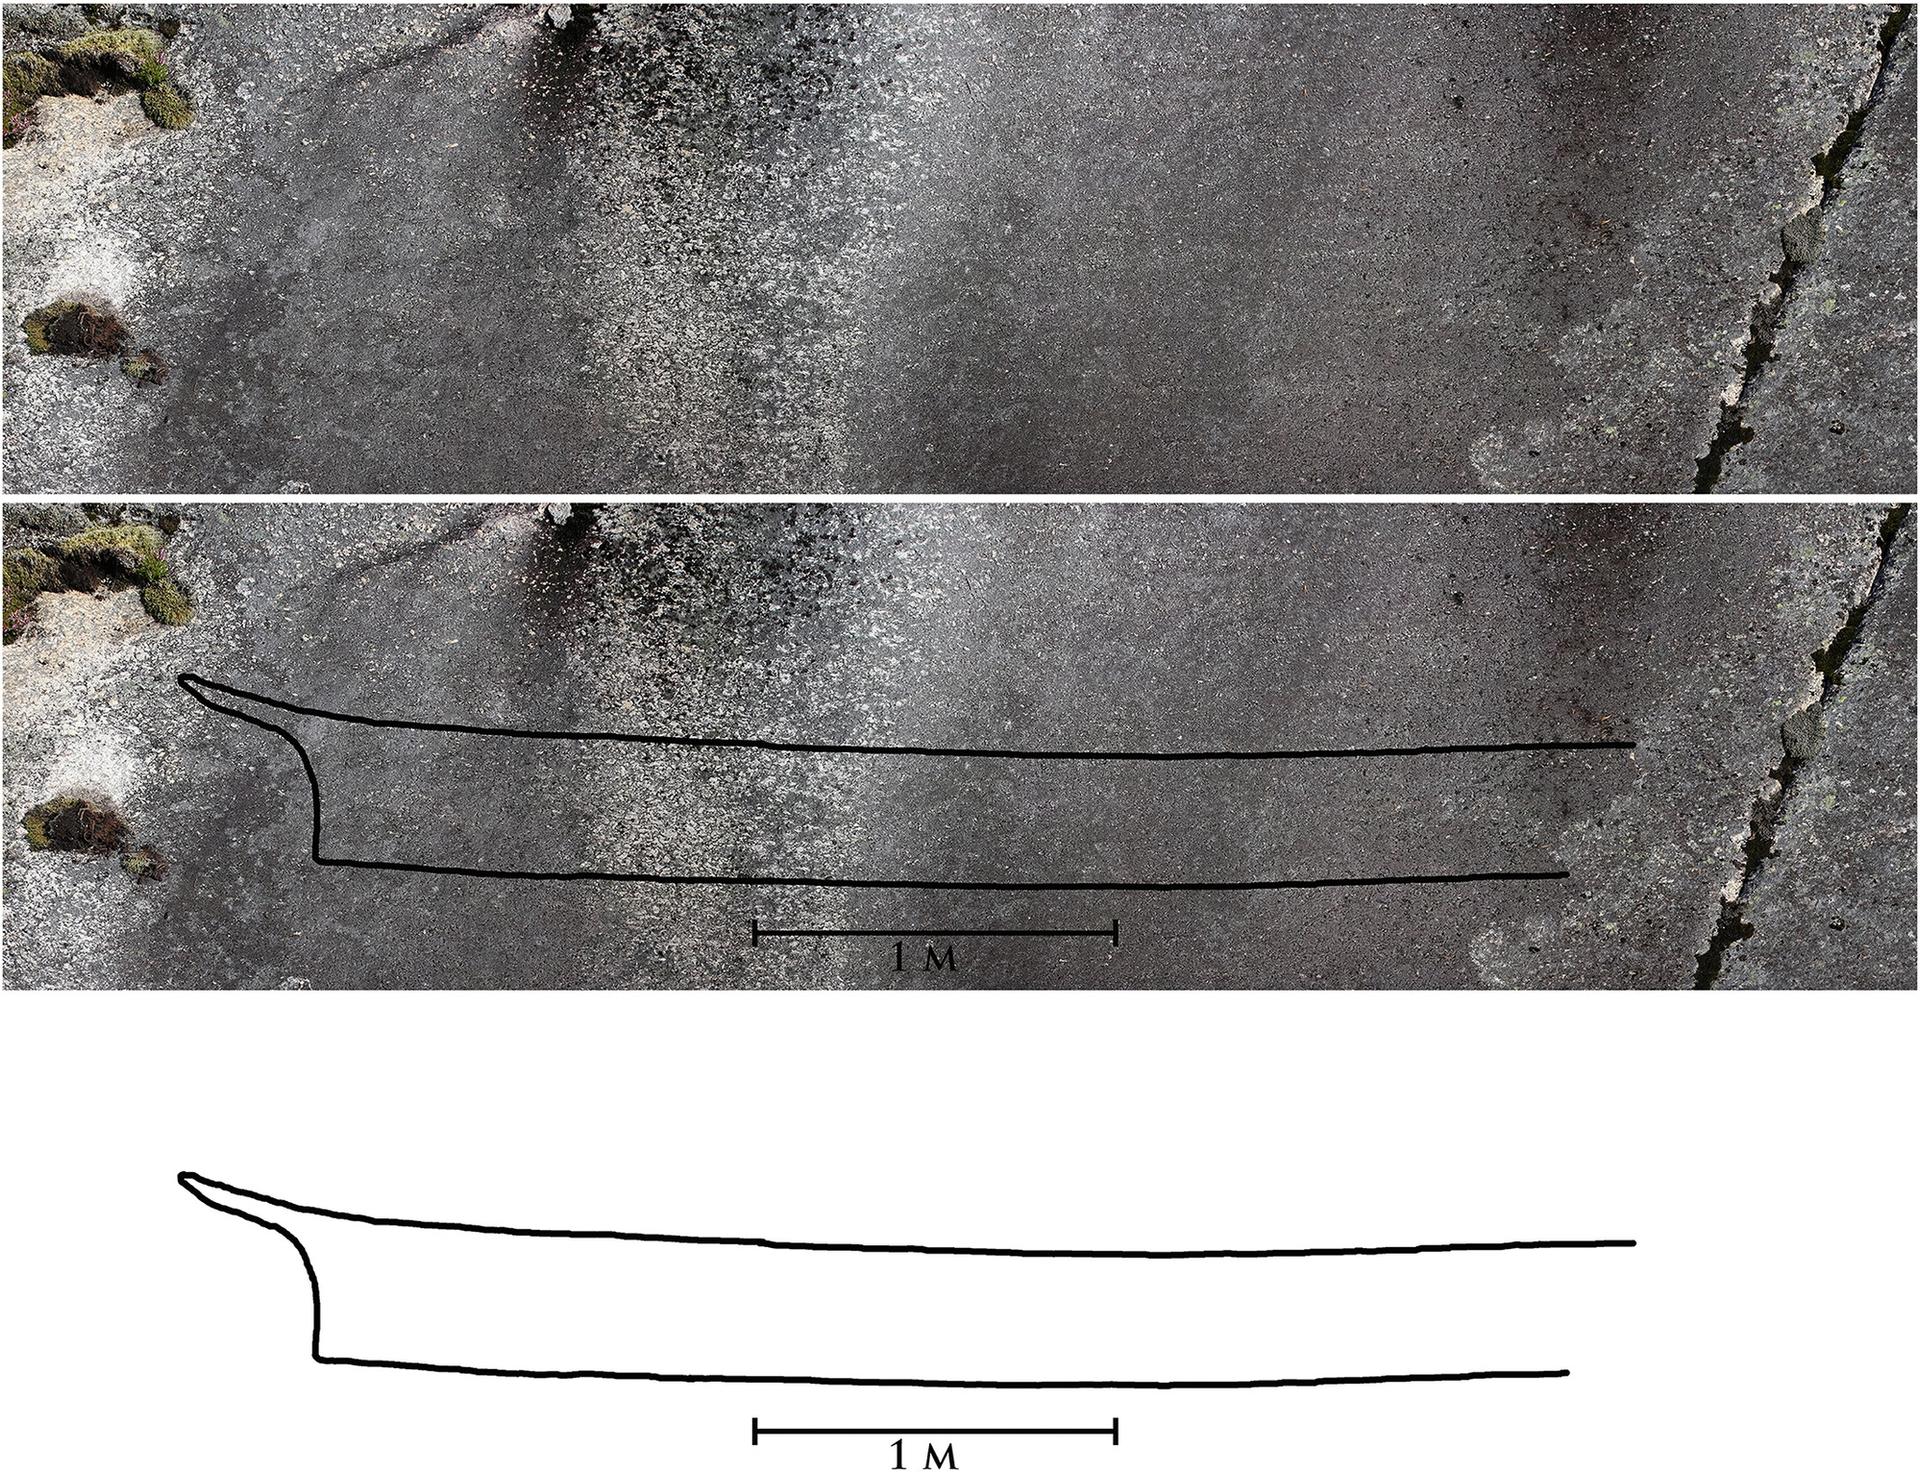 A digital tracing of the first boat carving at Valle shows it was probably a life-size image like others found at the site Tracing: Jan Magne Gjerde